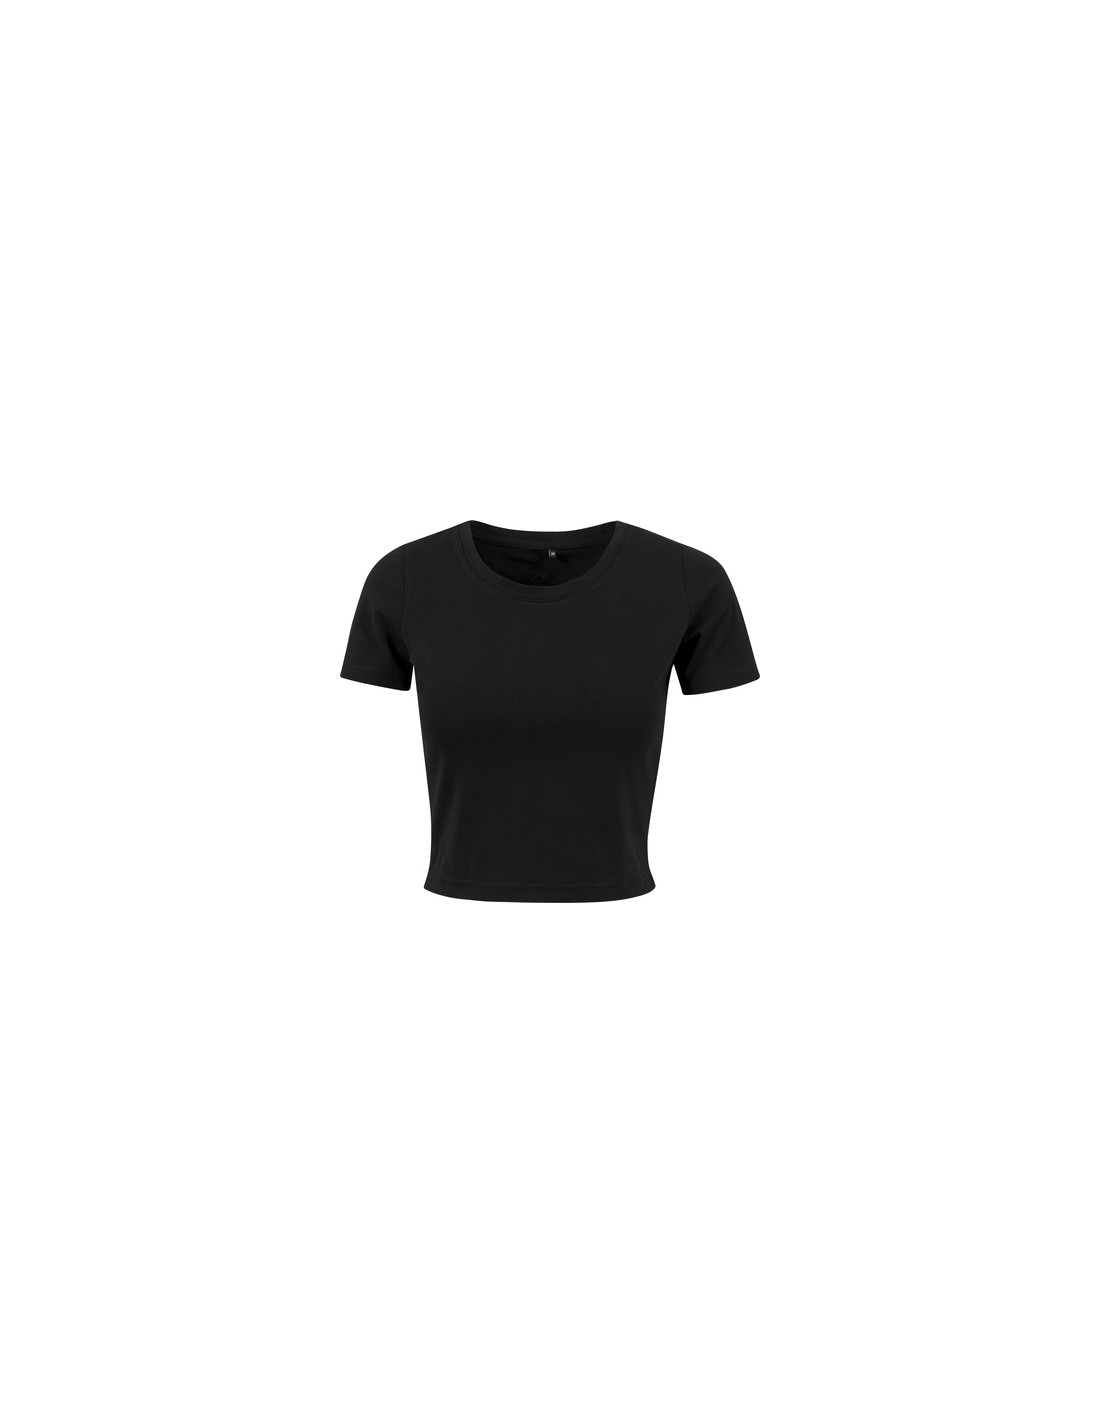 Crop Top Black - TBY042-Black - Tops for Women